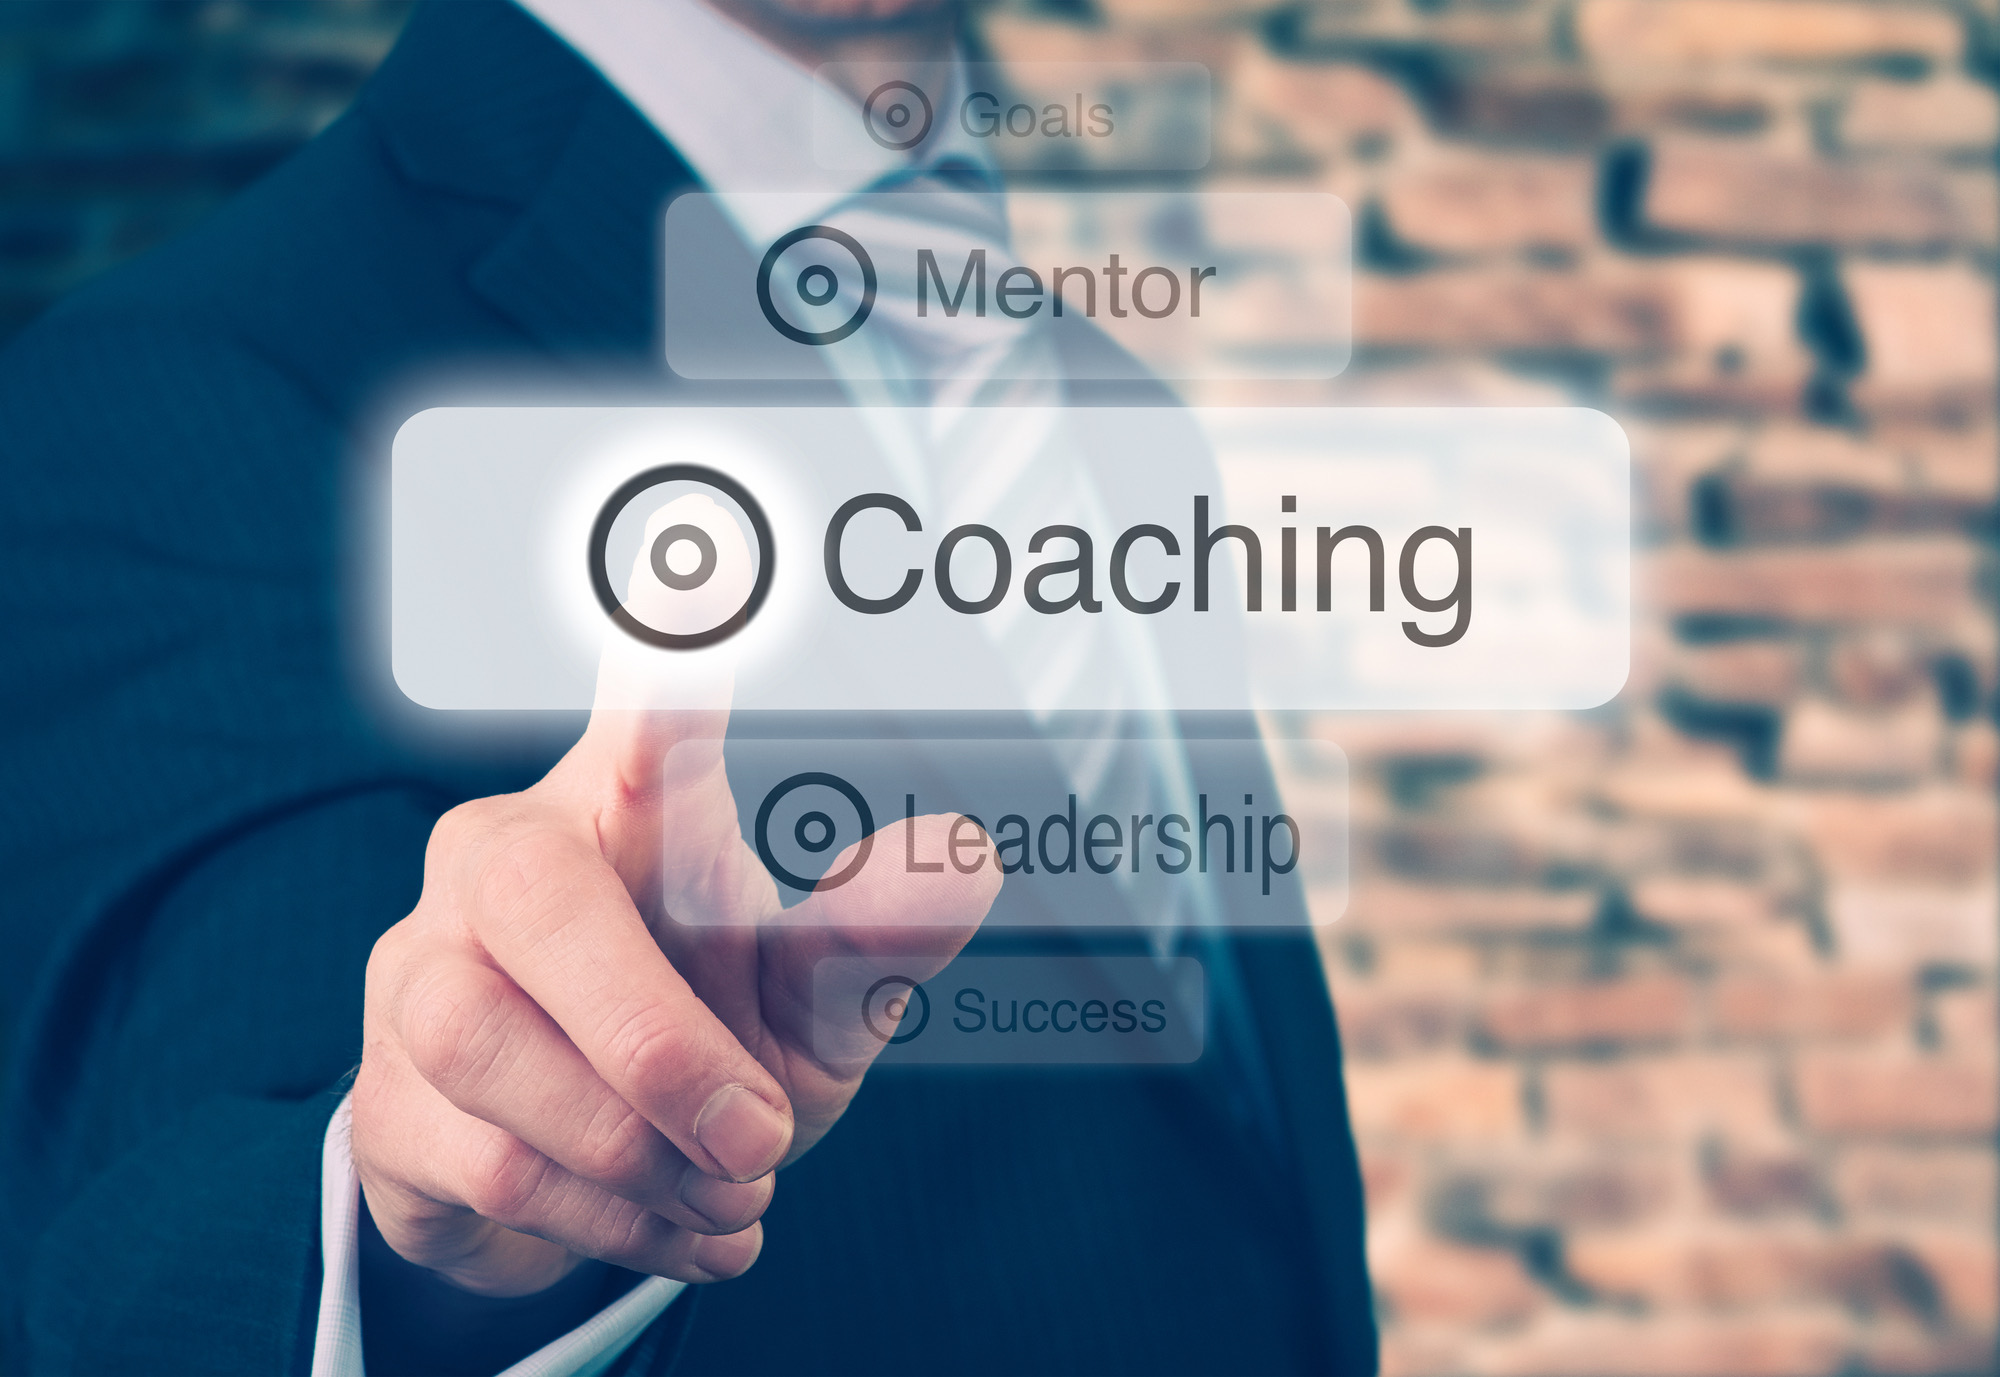  Two Coaching Models Every Leader Should Master